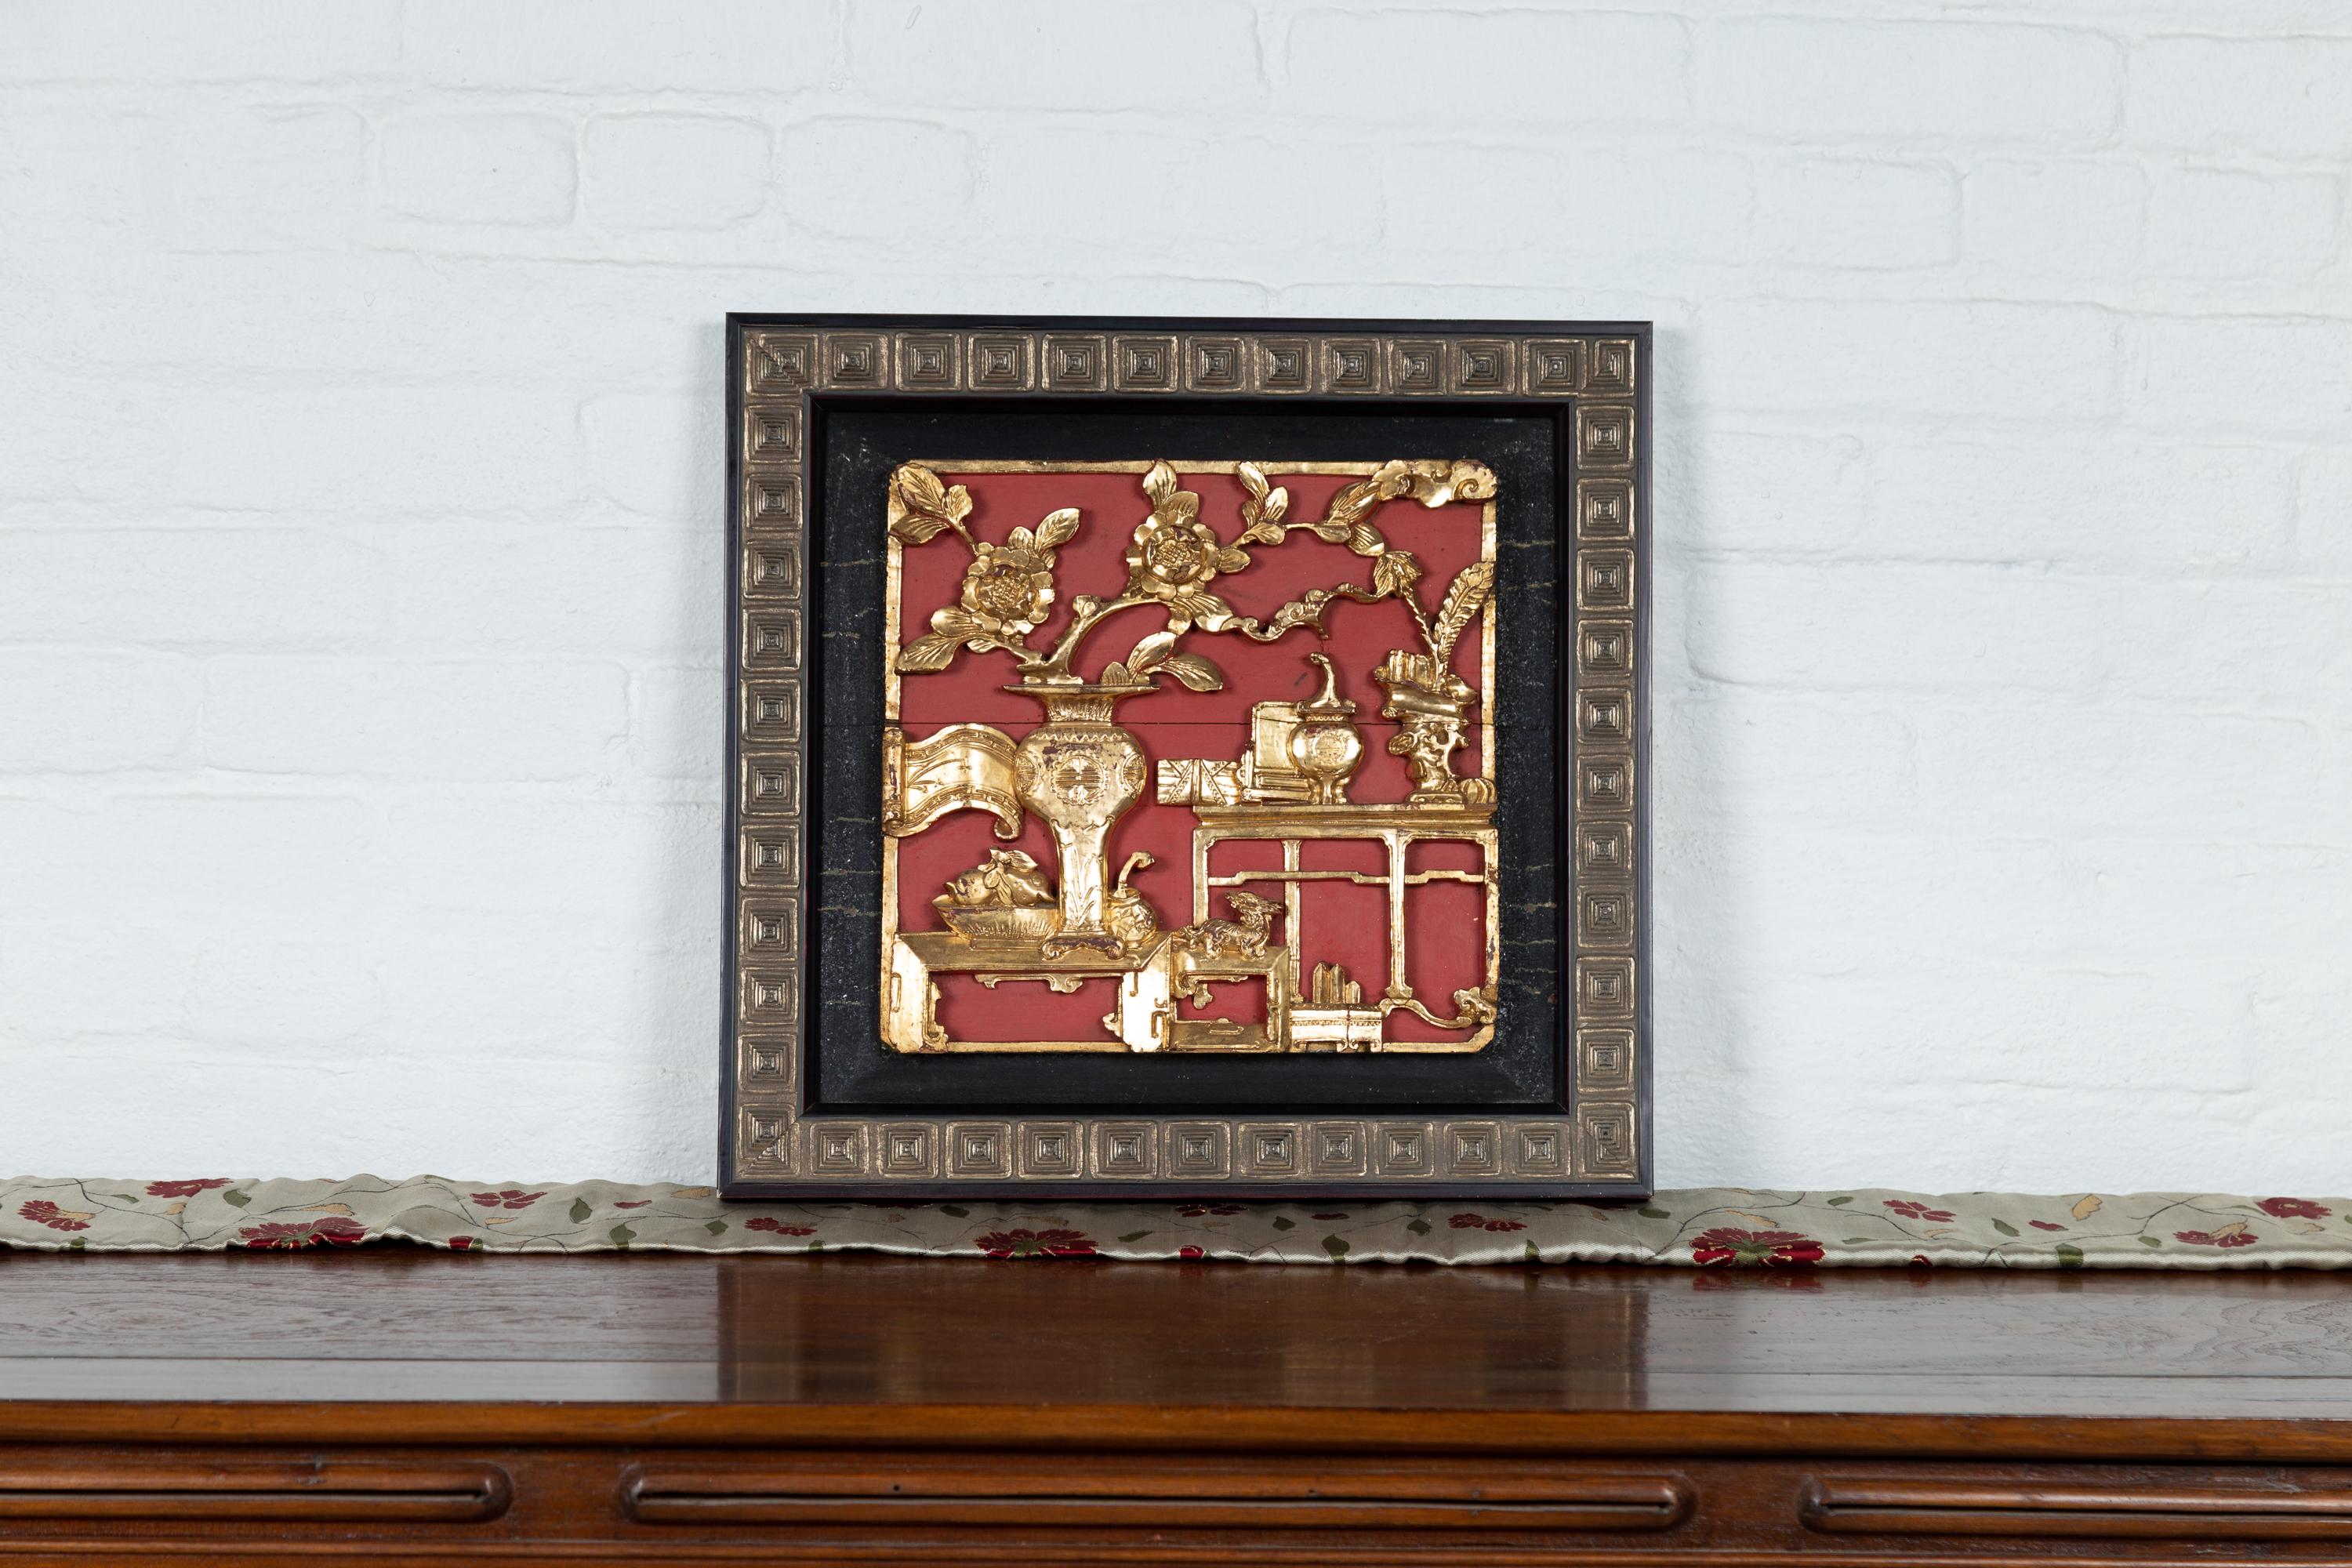 A late Qing Dynasty period giltwood architectural panel on red ground, with floral motifs, set in new frame. Delve into the rich tapestry of the late Qing Dynasty period with this giltwood architectural panel, a piece that beautifully showcases the